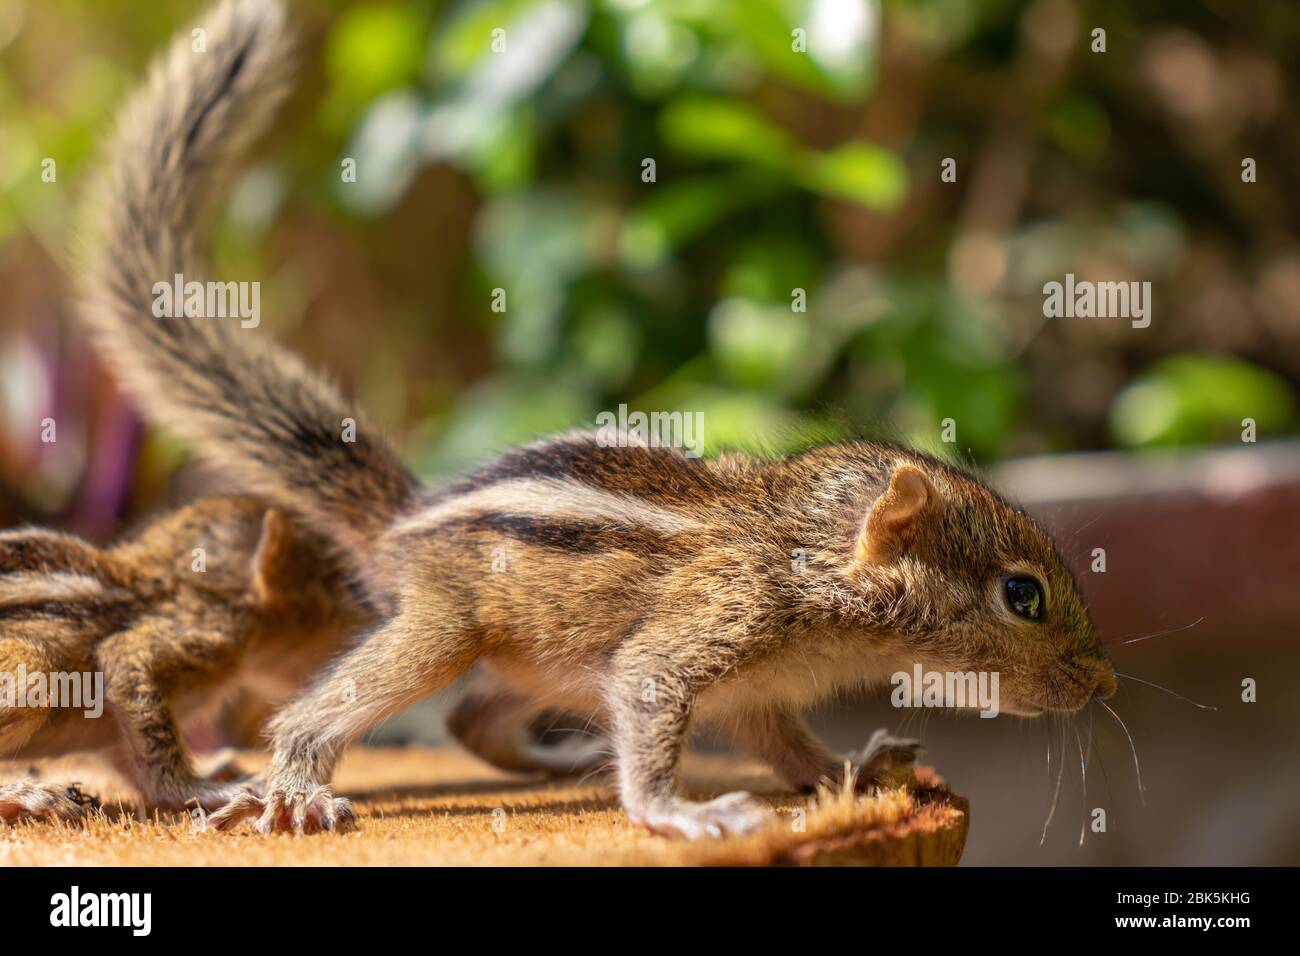 Hungry little Baby squirrels looking out for their mother Stock Photo